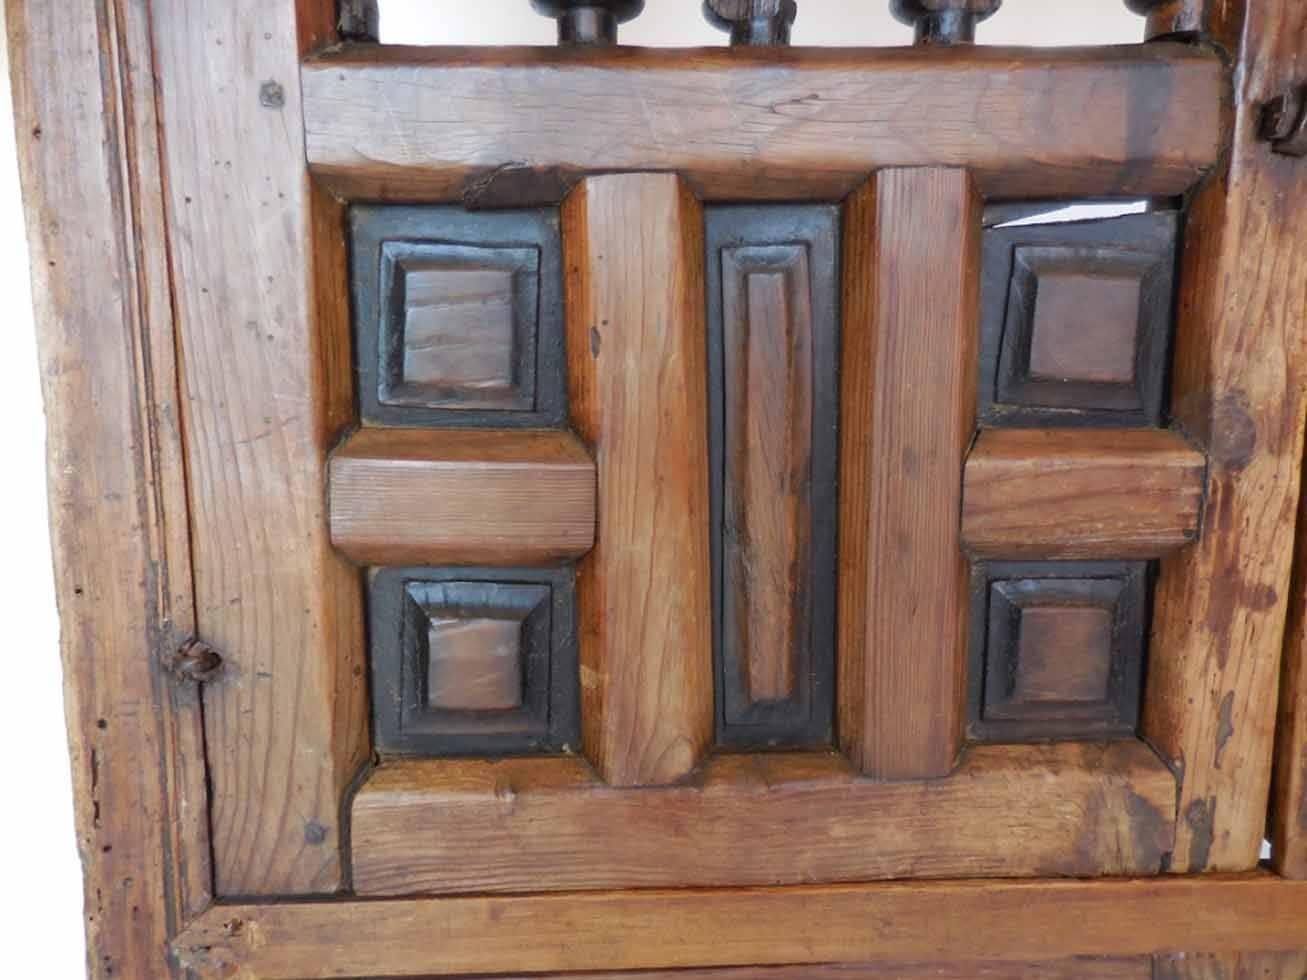 18th century Spanish shutters. Top and bottom set of shutters in a window frame. All original hardware. Wear consistent with age and use, but functions well. Classic Spanish style. Some losses on turnings and frame, but none of which distracts.